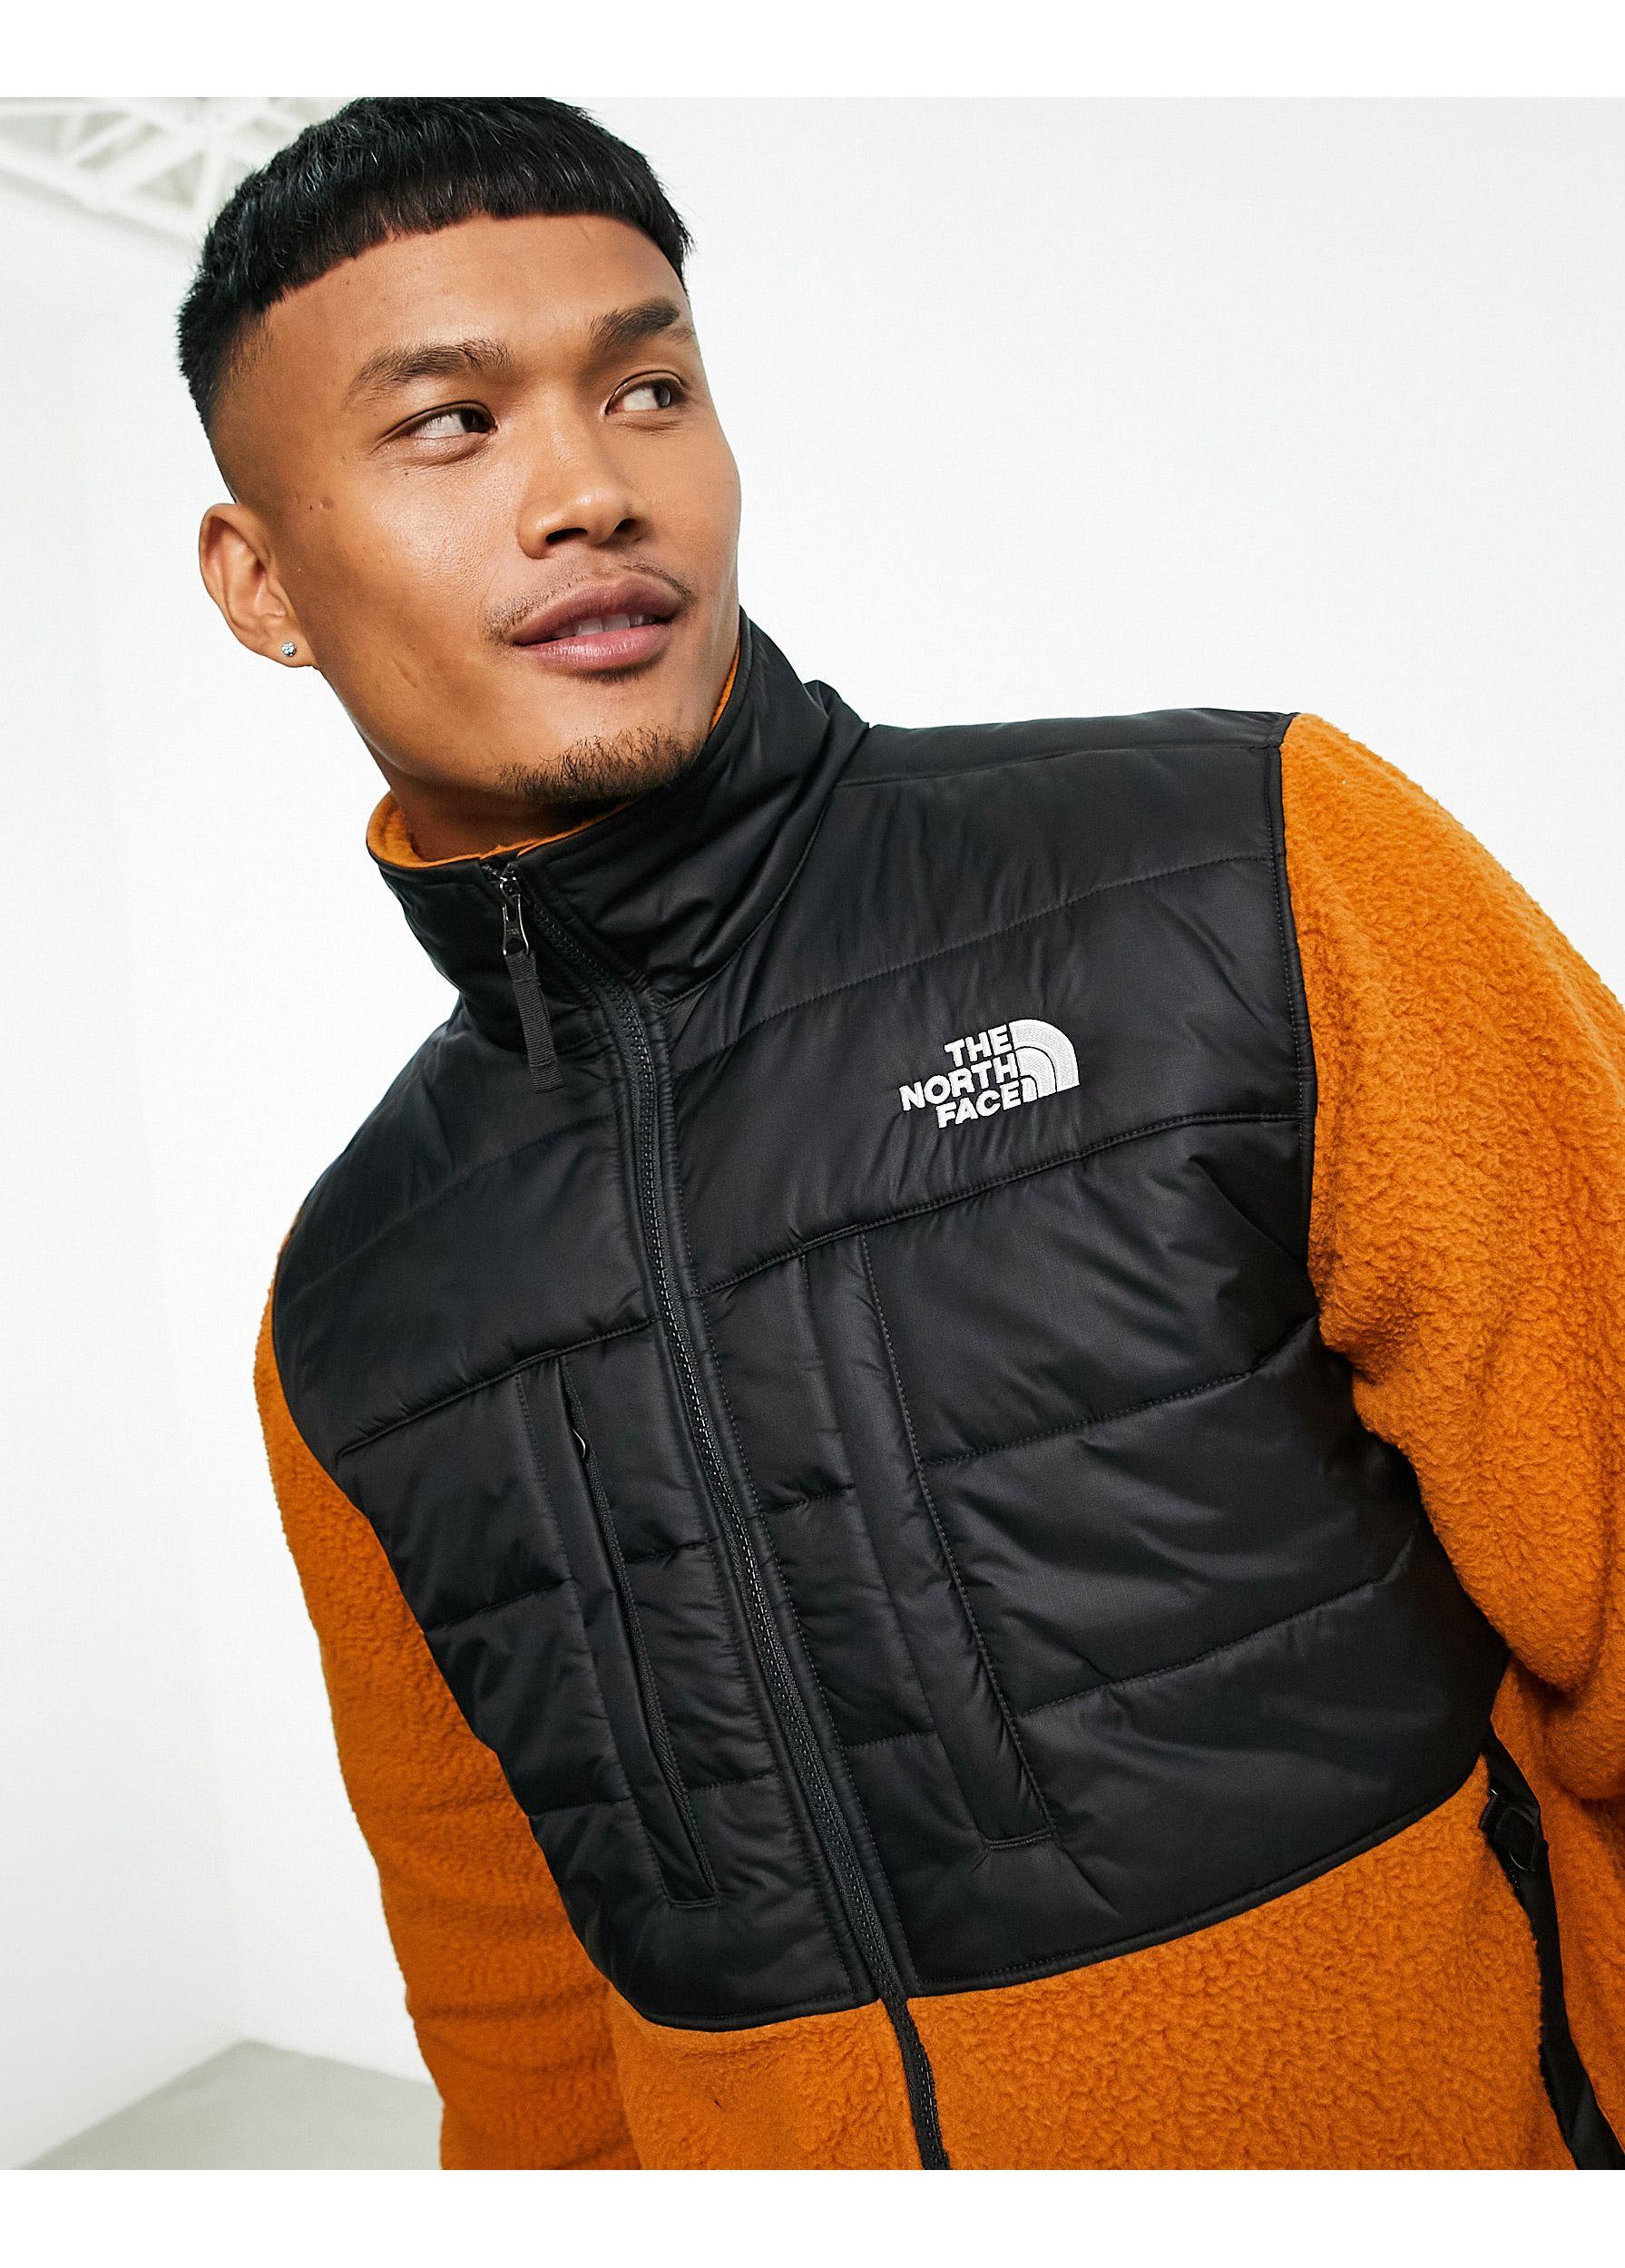 The North Face Graphic hoodie in gray Exclusive to ASOS